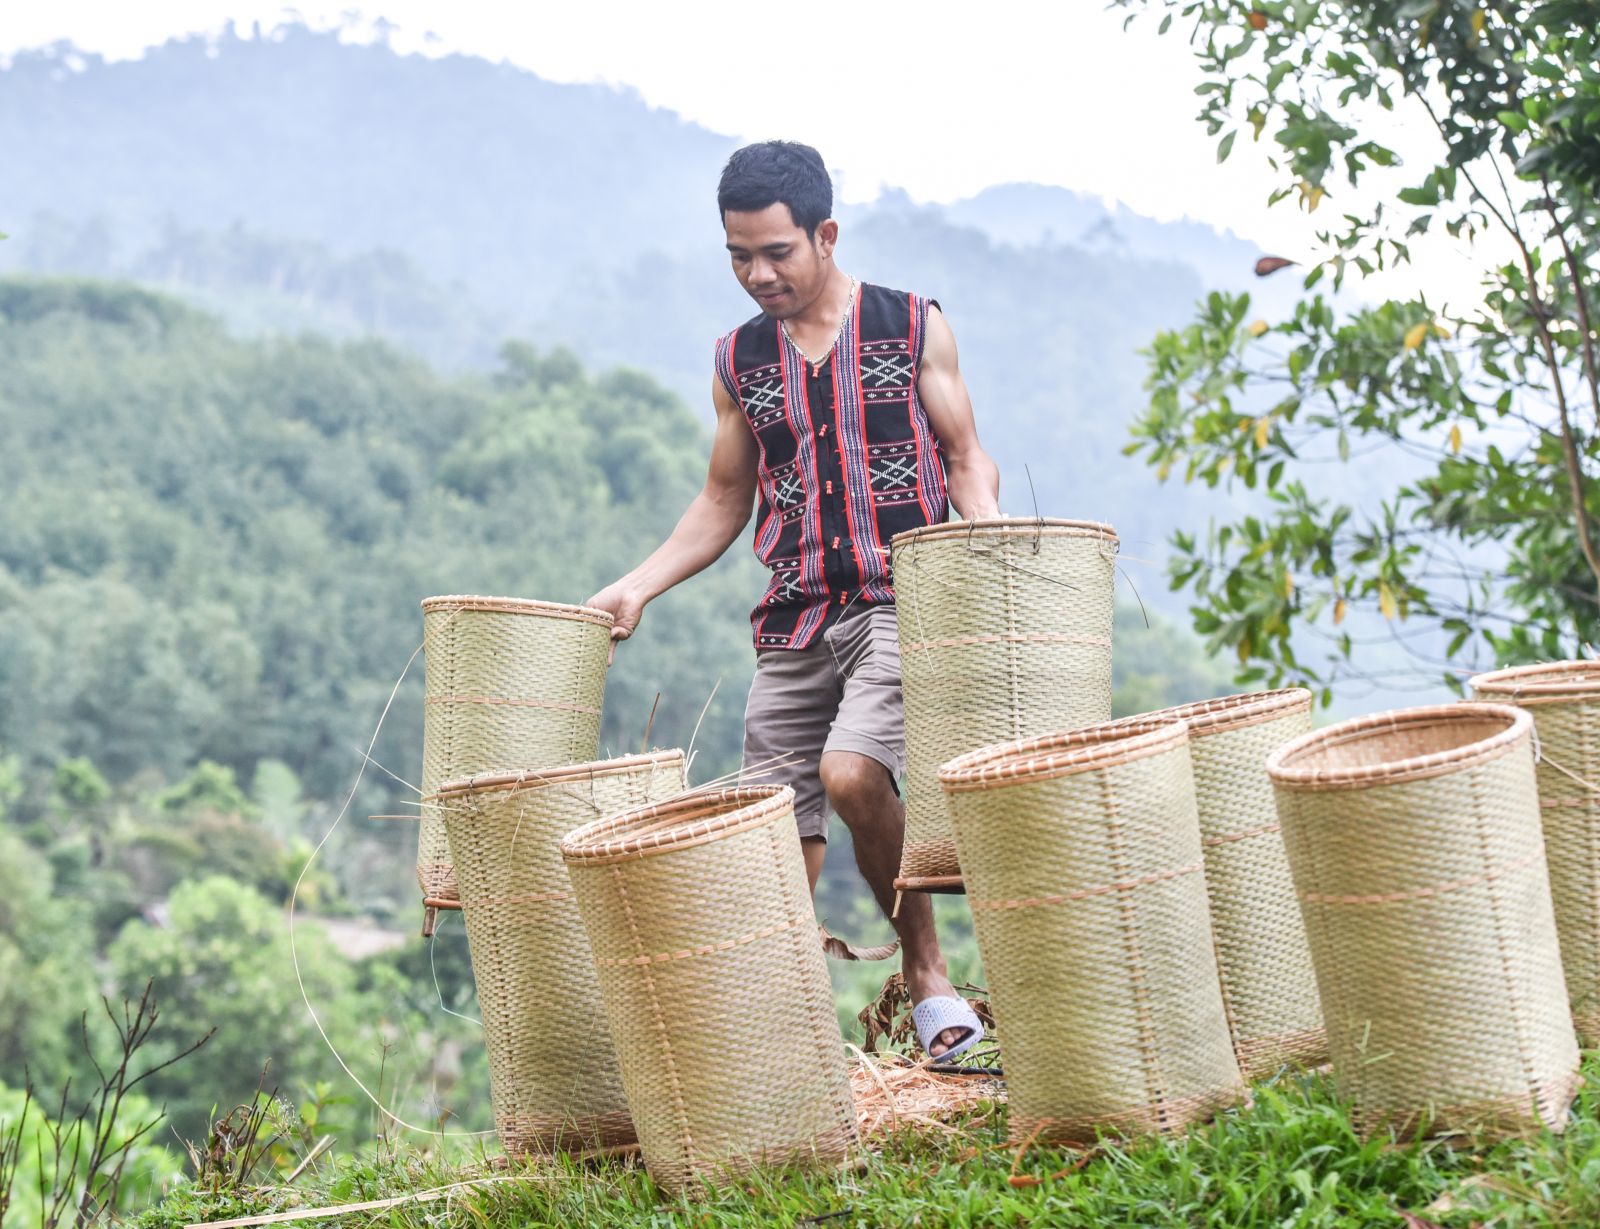 In the cool sunshine, the gùi baskets are dried to ensure durability